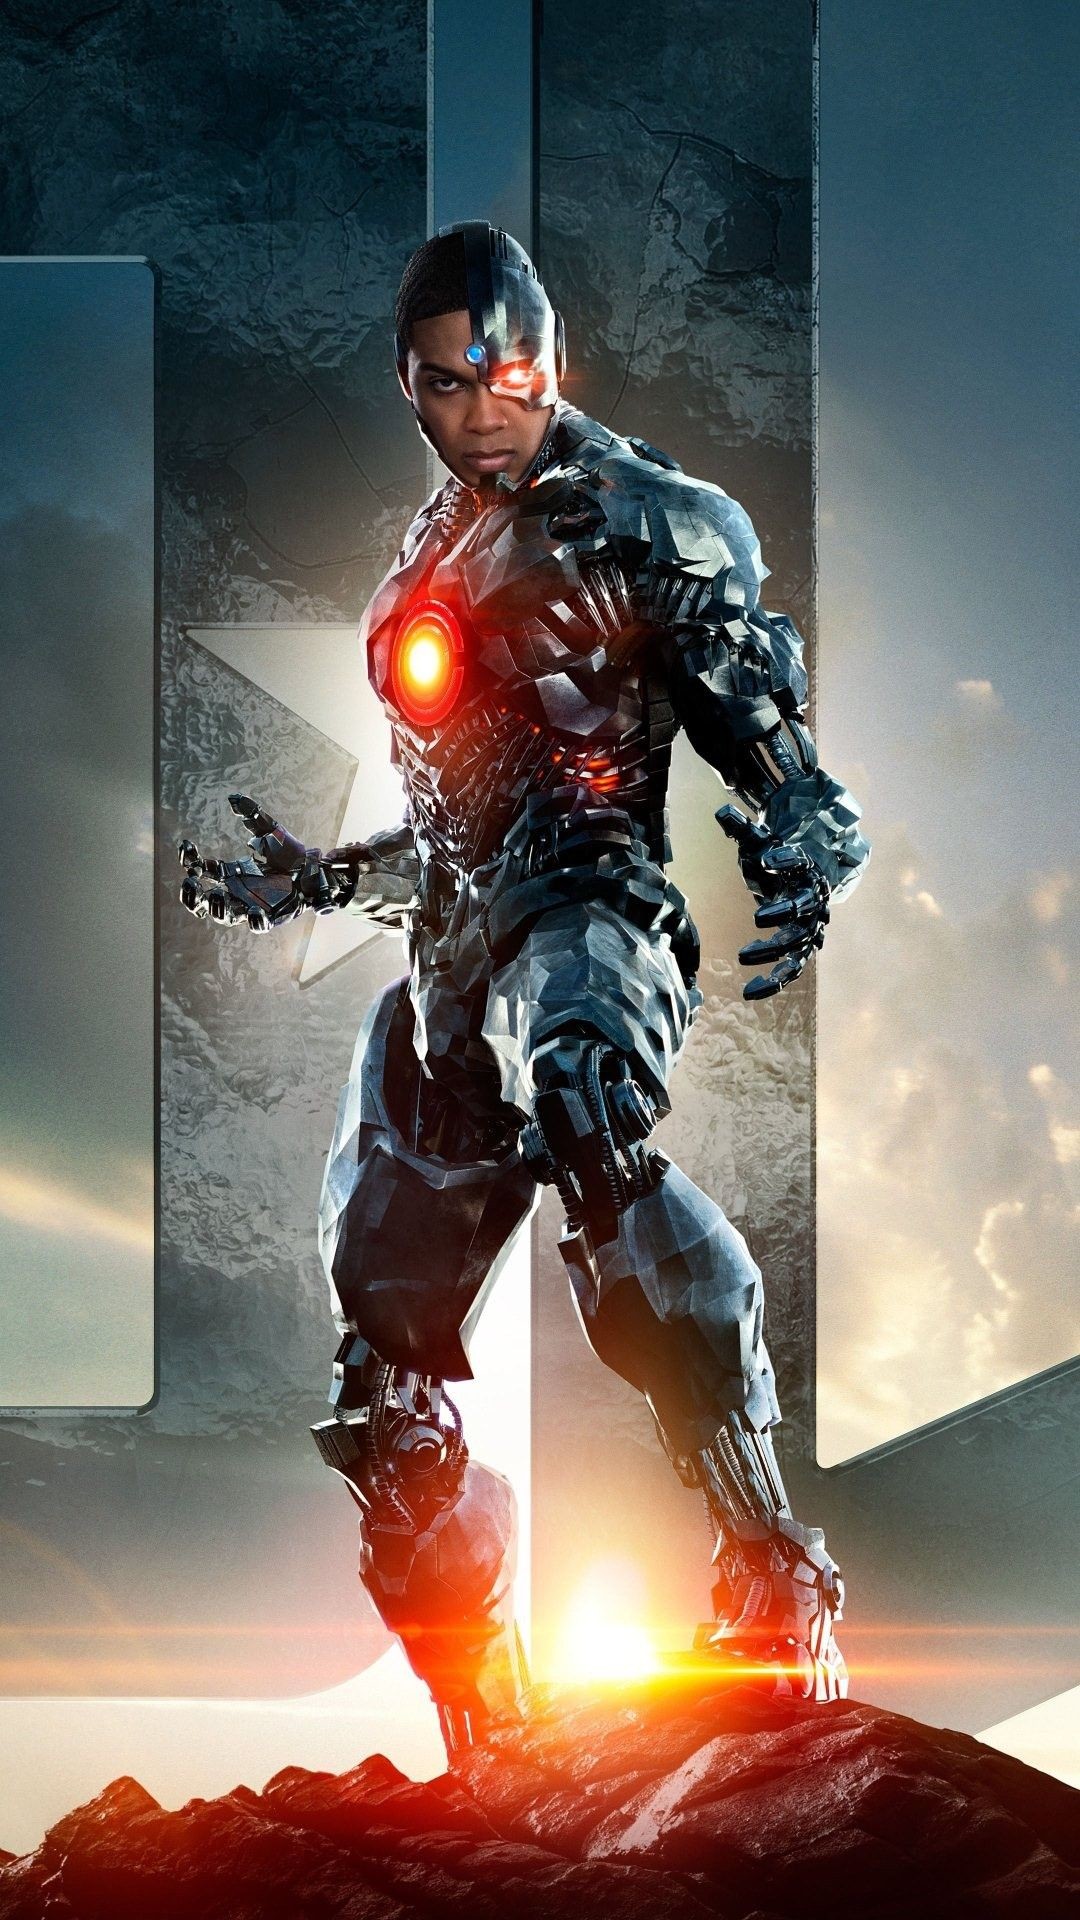 Cyborg Justice League Android And Iphone Wallpaper - Cyborg Justice League  Movie - 1080x1920 Wallpaper 